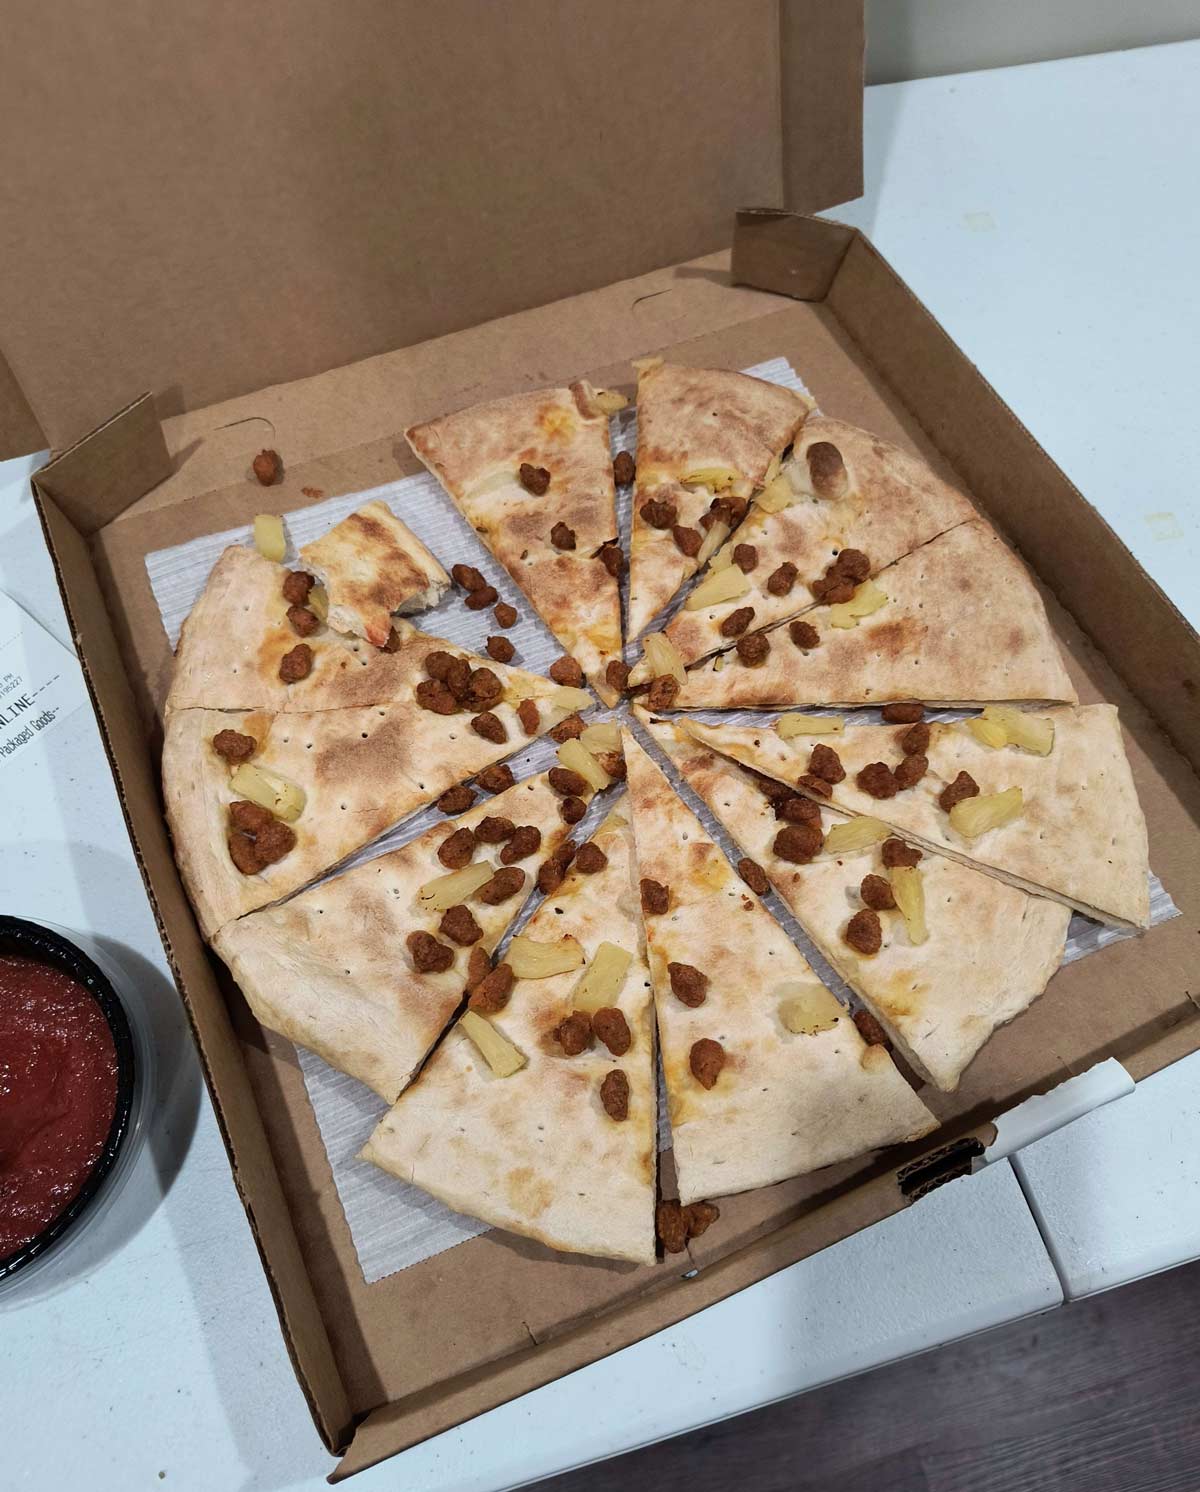 My friend recently ordered a pizza accidently with no sauce no cheese...